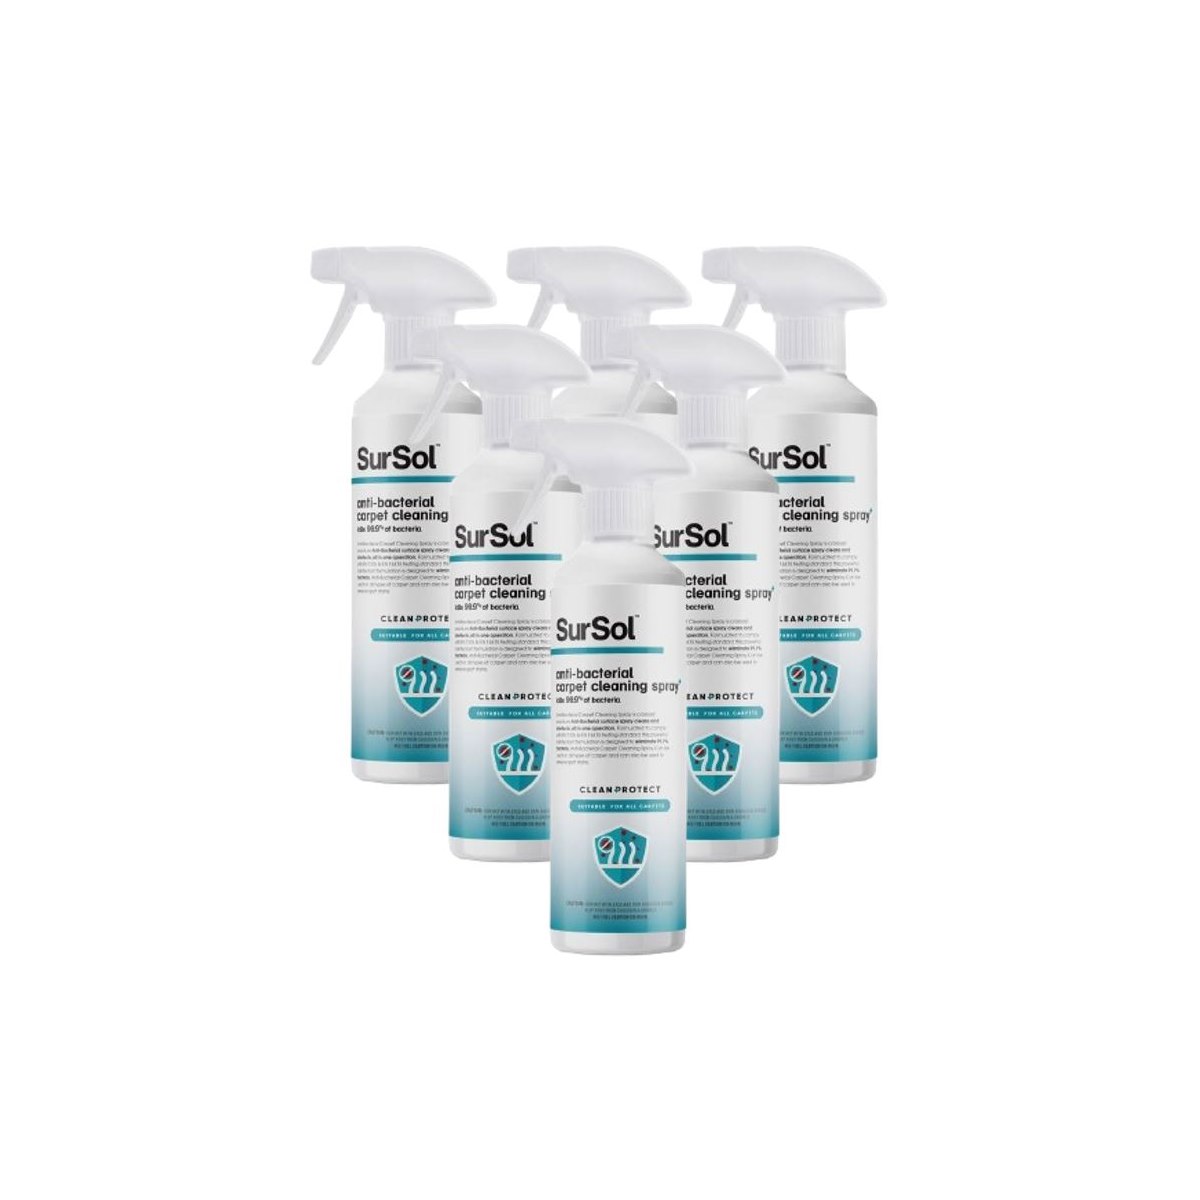 Case of 6 x SurSol Anti-Bacterial Carpet Cleaning Spray 1 Litre